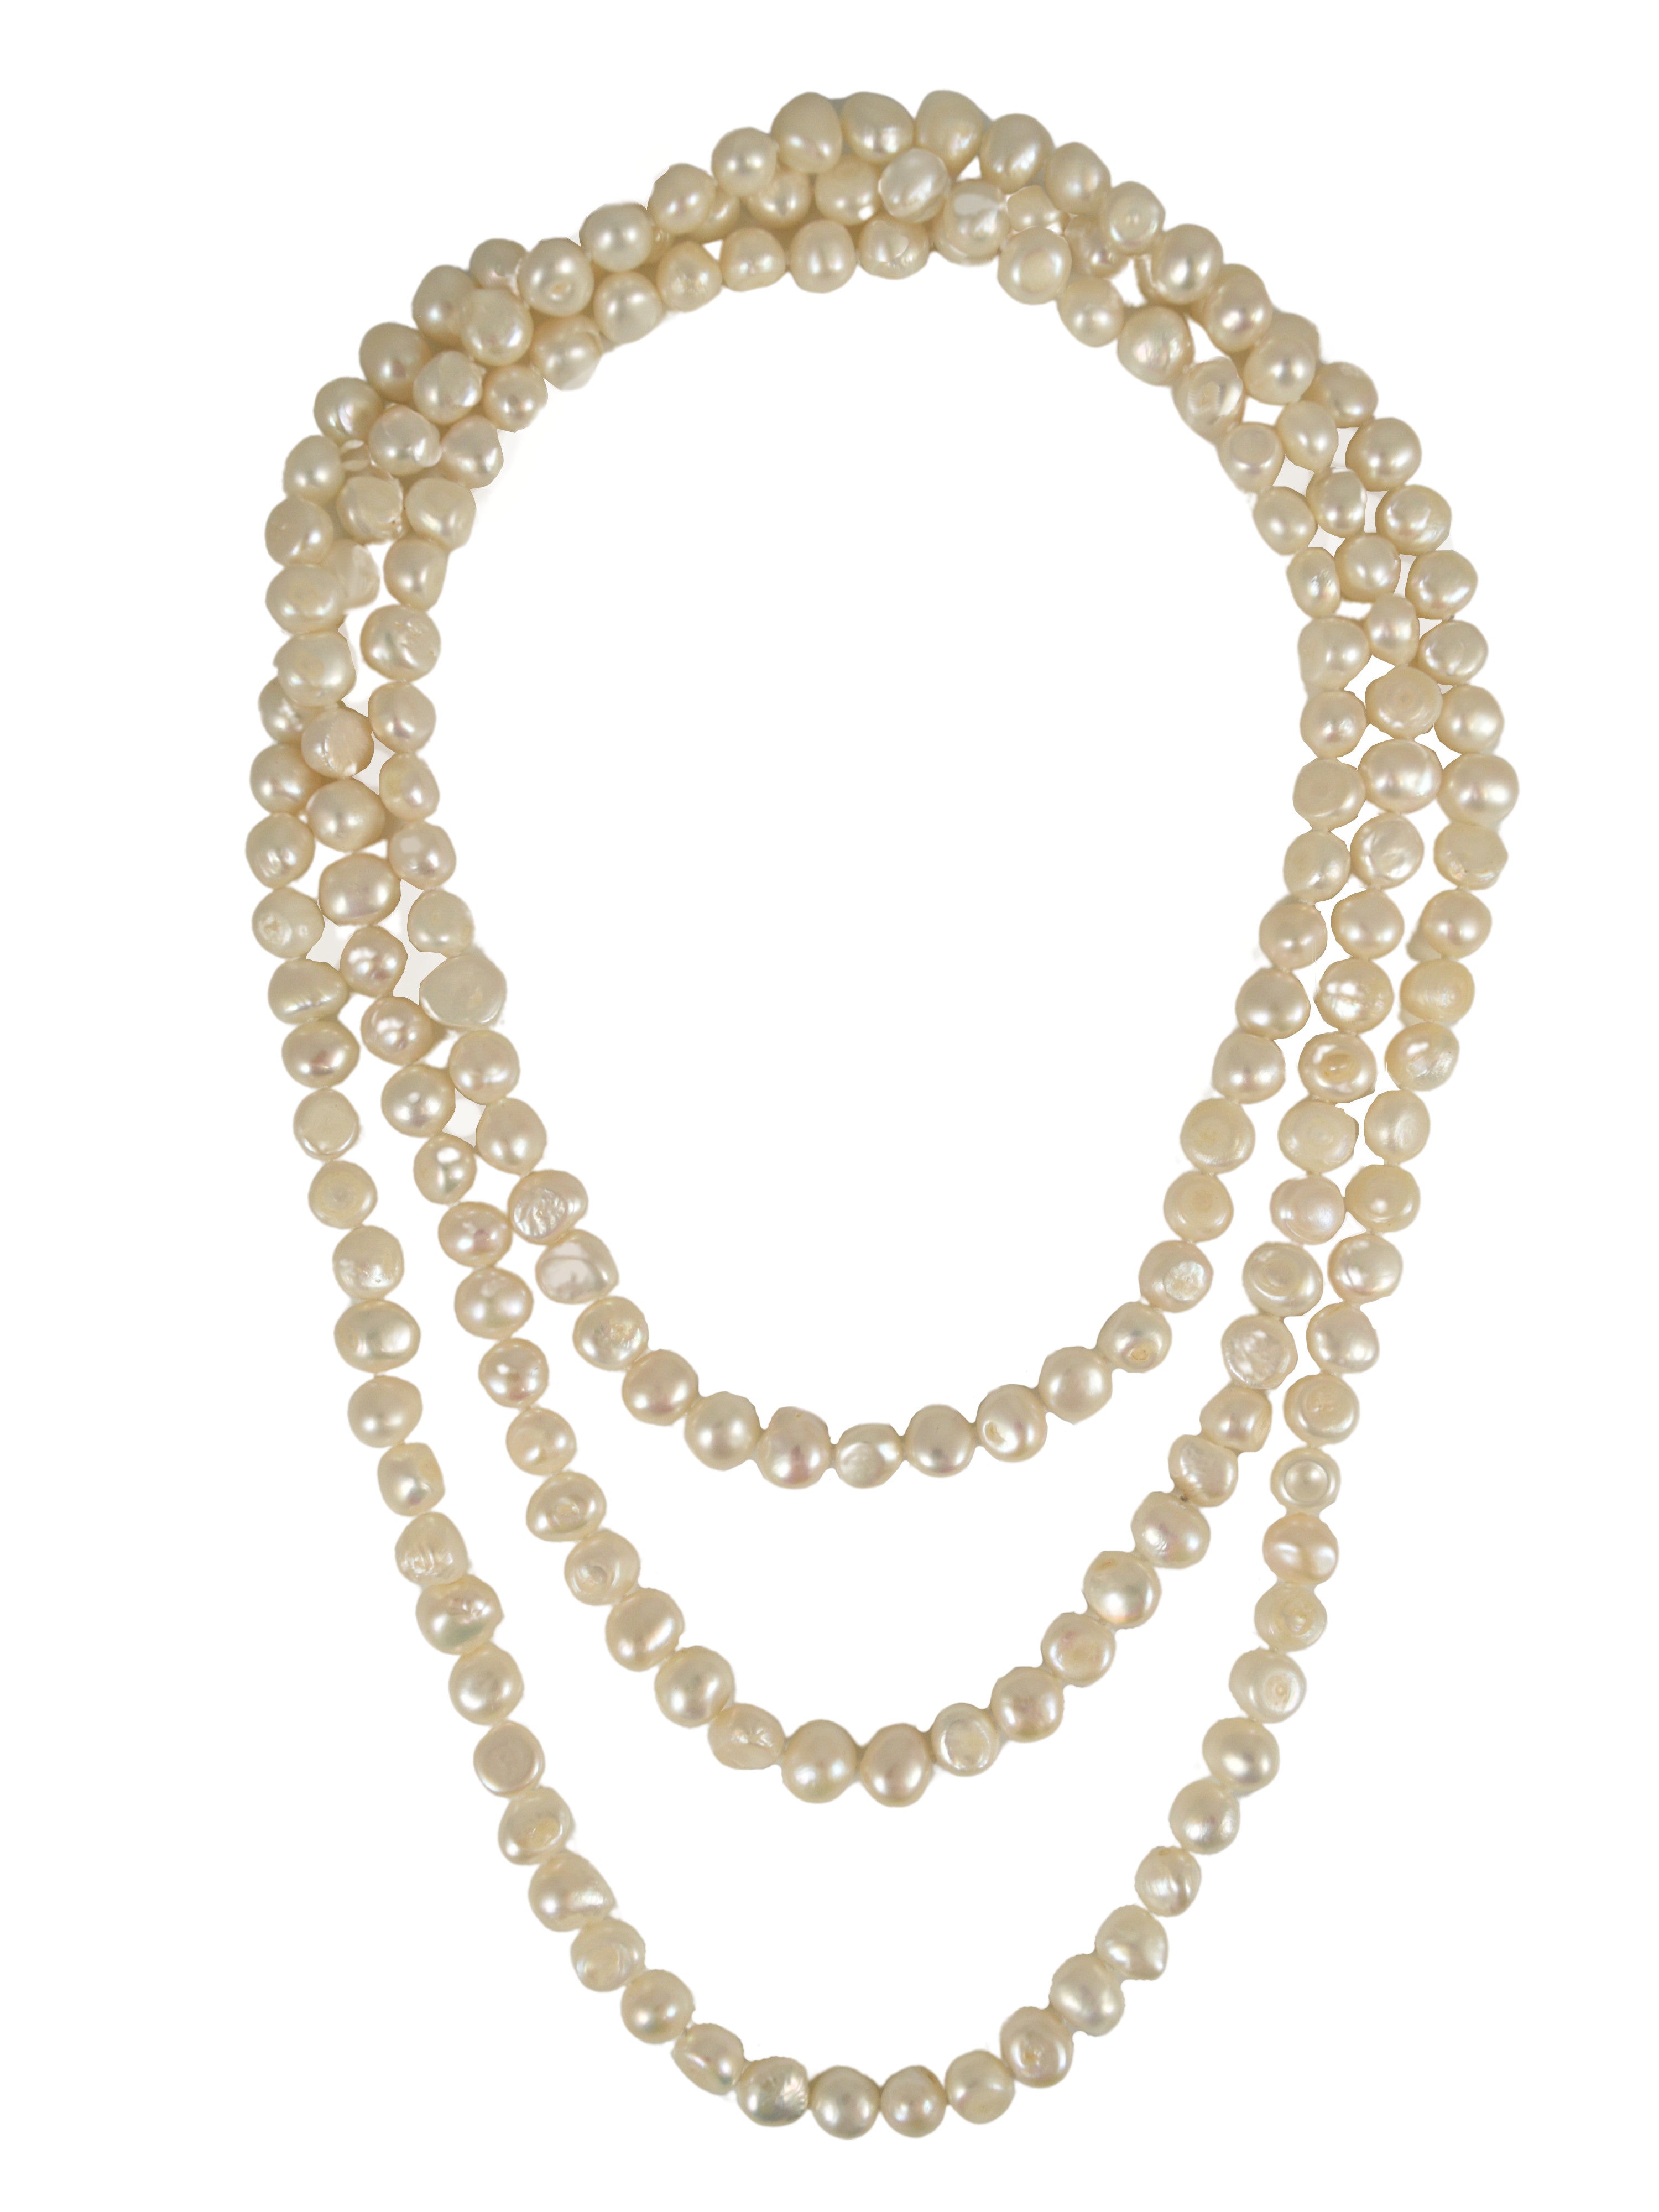 Whitley Wrap Necklace in White Pearl